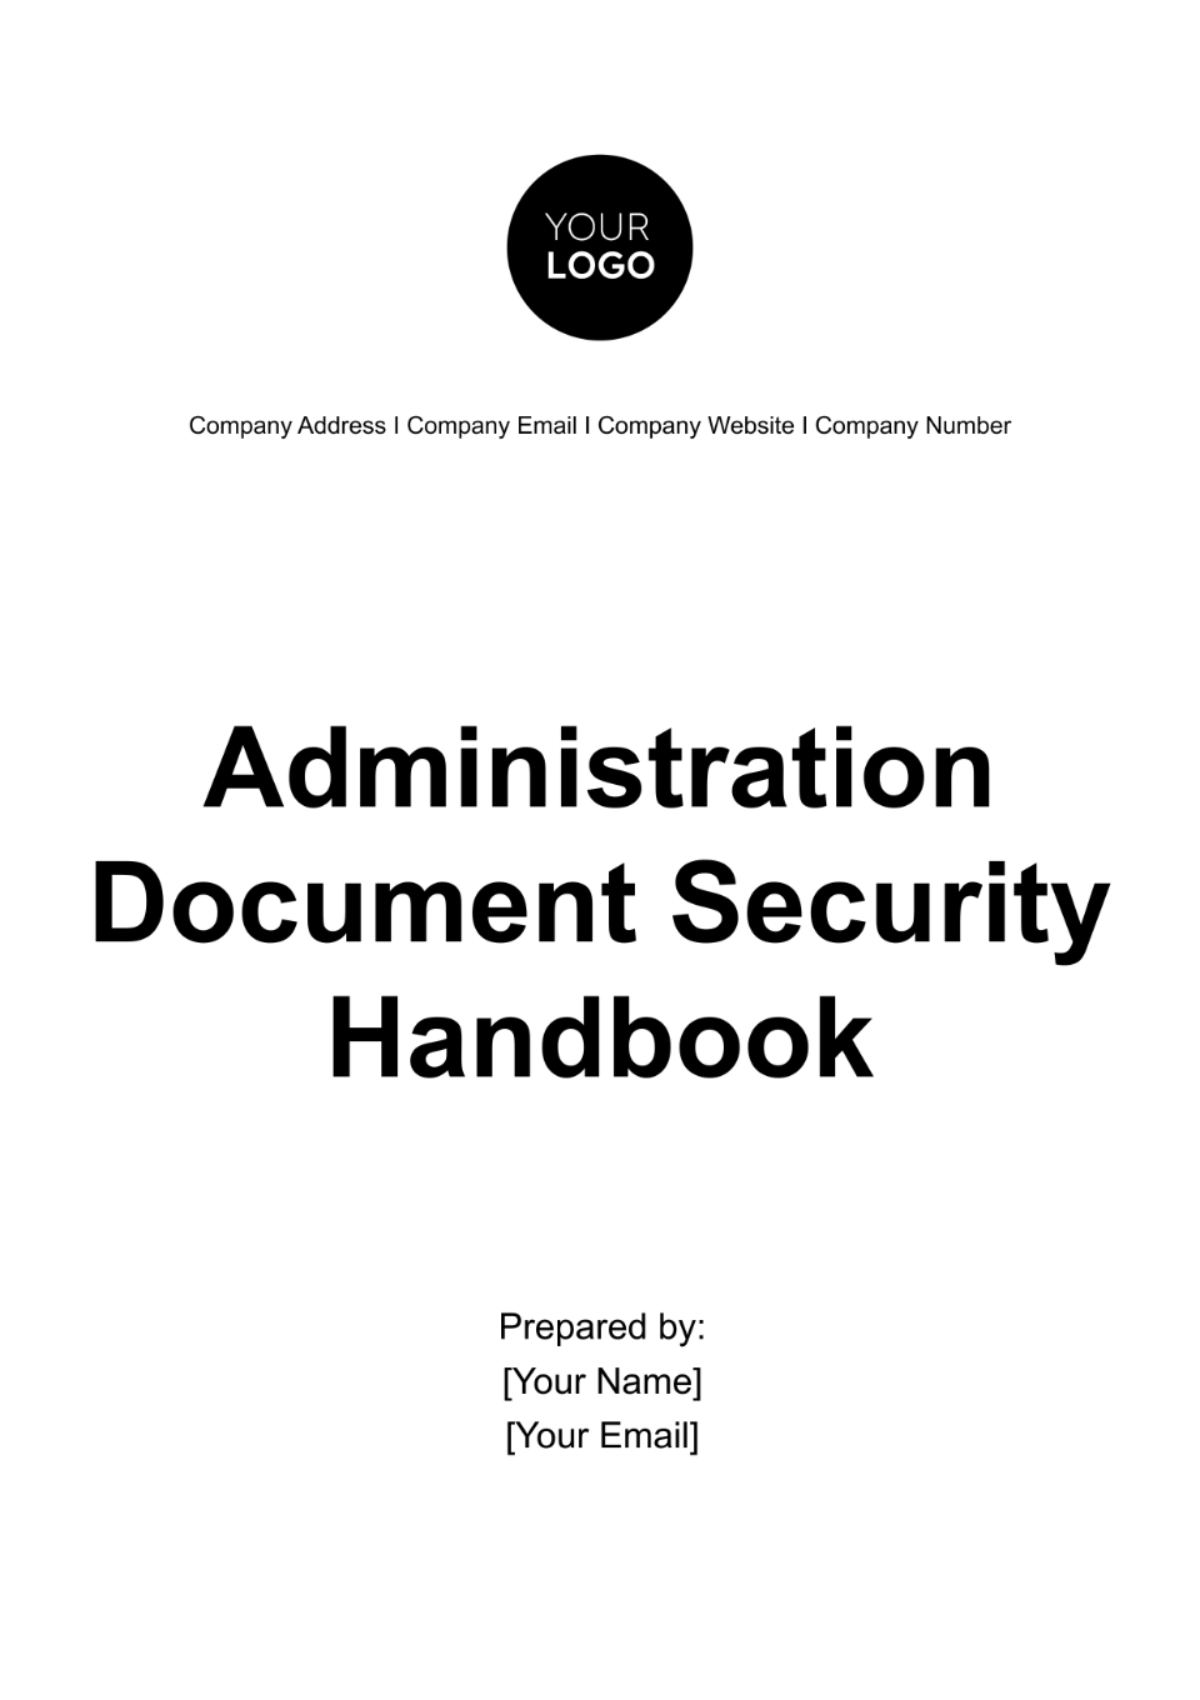 Administration Document Security Handbook Template